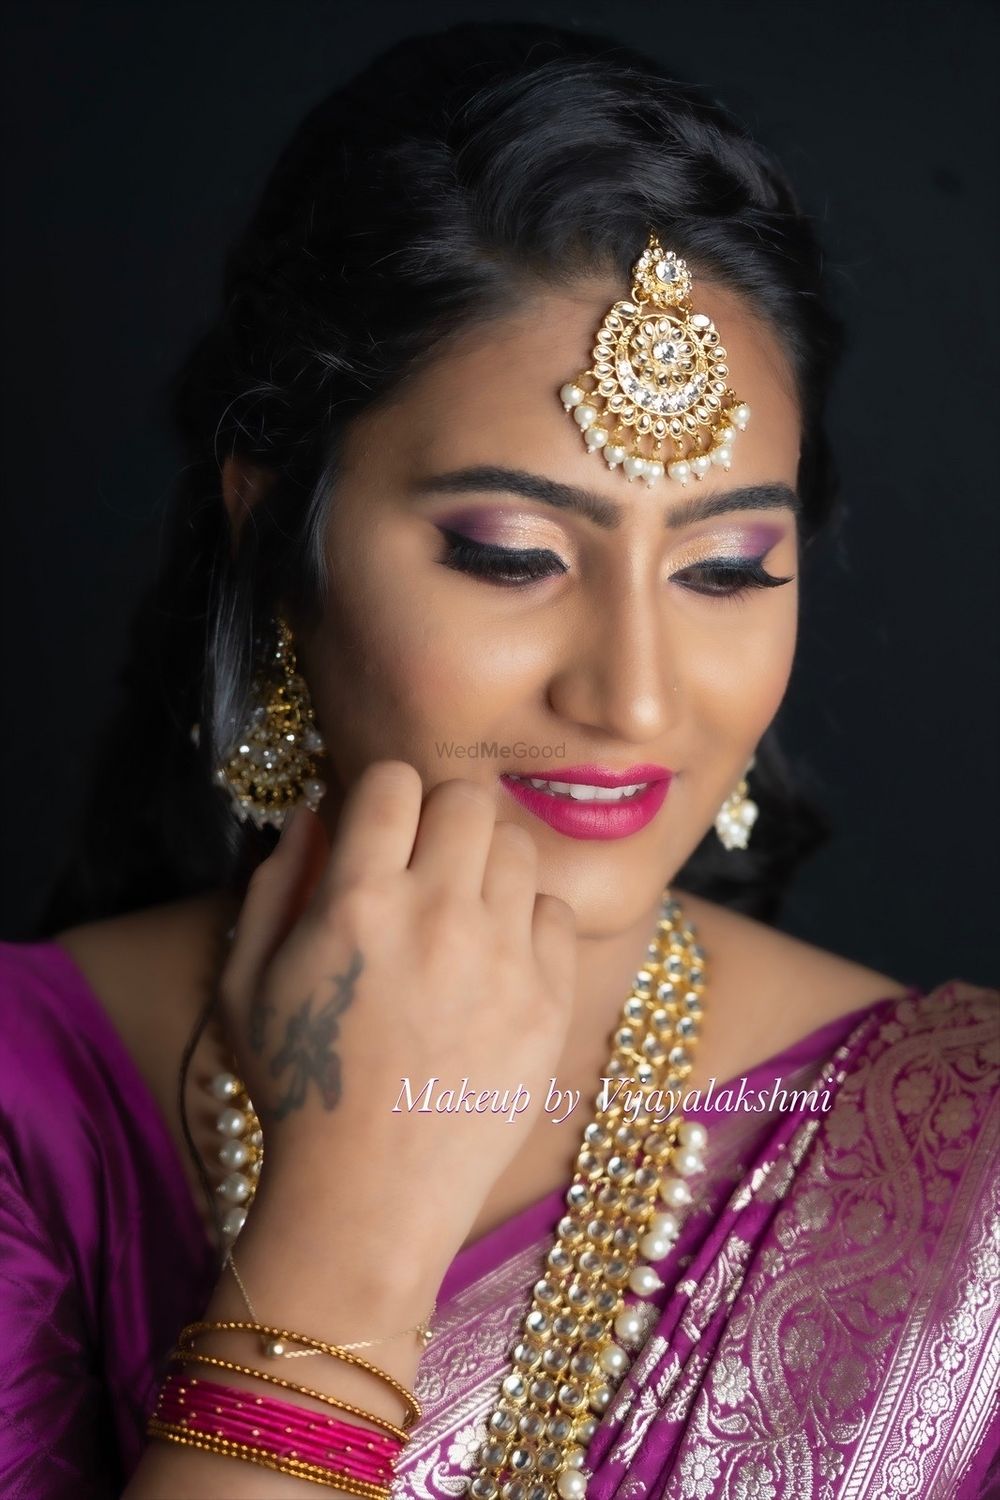 Photo From Classic Makeover - By Makeup  by Vijayalakshmi